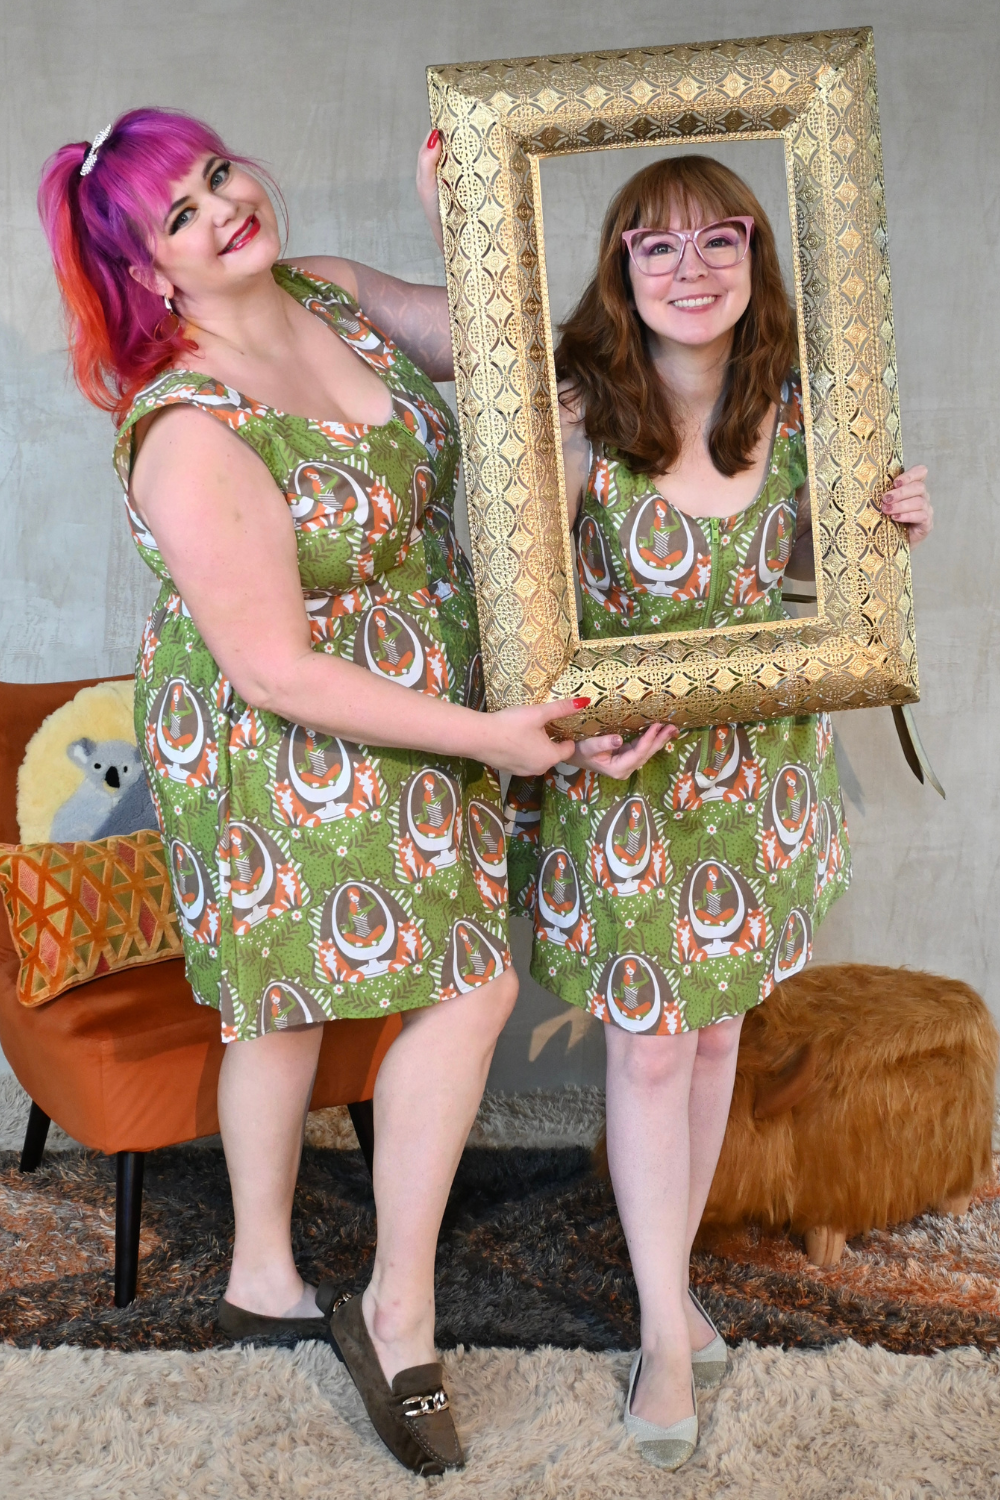 Two models wearing matching olive green fox and girl print scoopneck sleeveless dresses & posing with picture frame